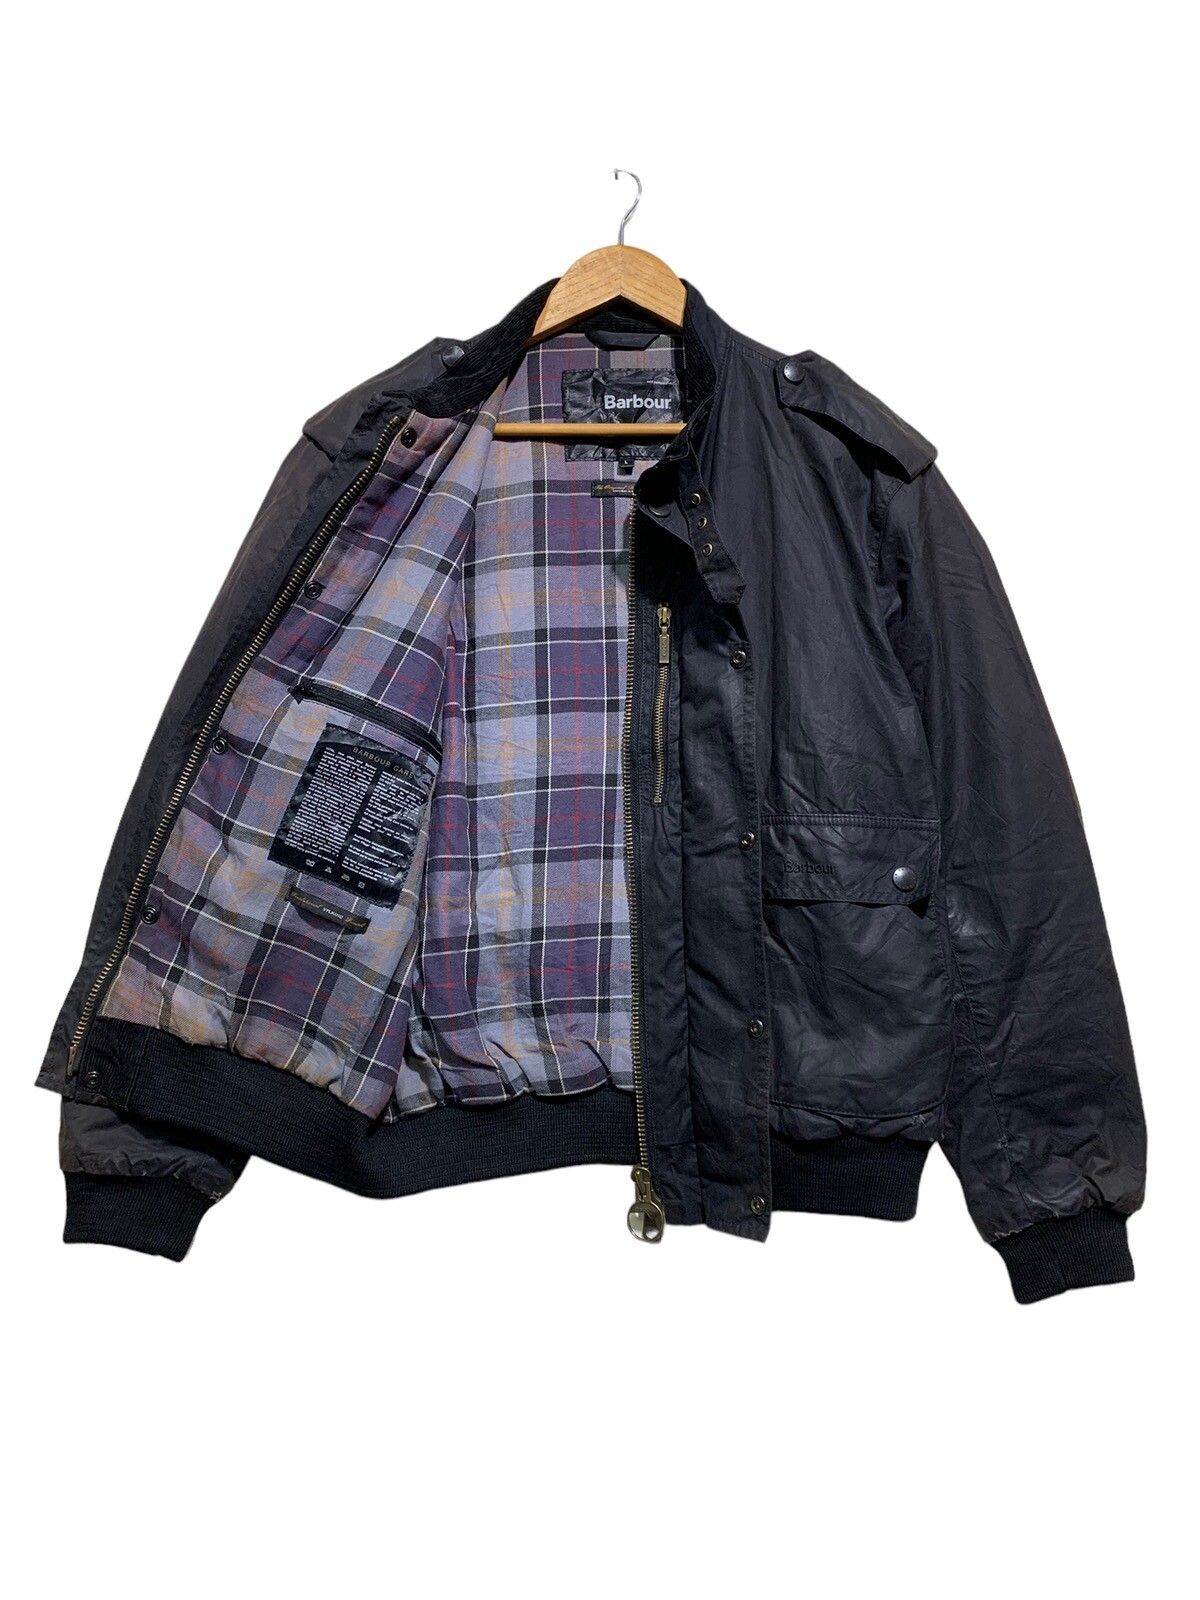 🔥BARBOUR INTERNATIONAL WAXED BOMBER JACKETS - 8